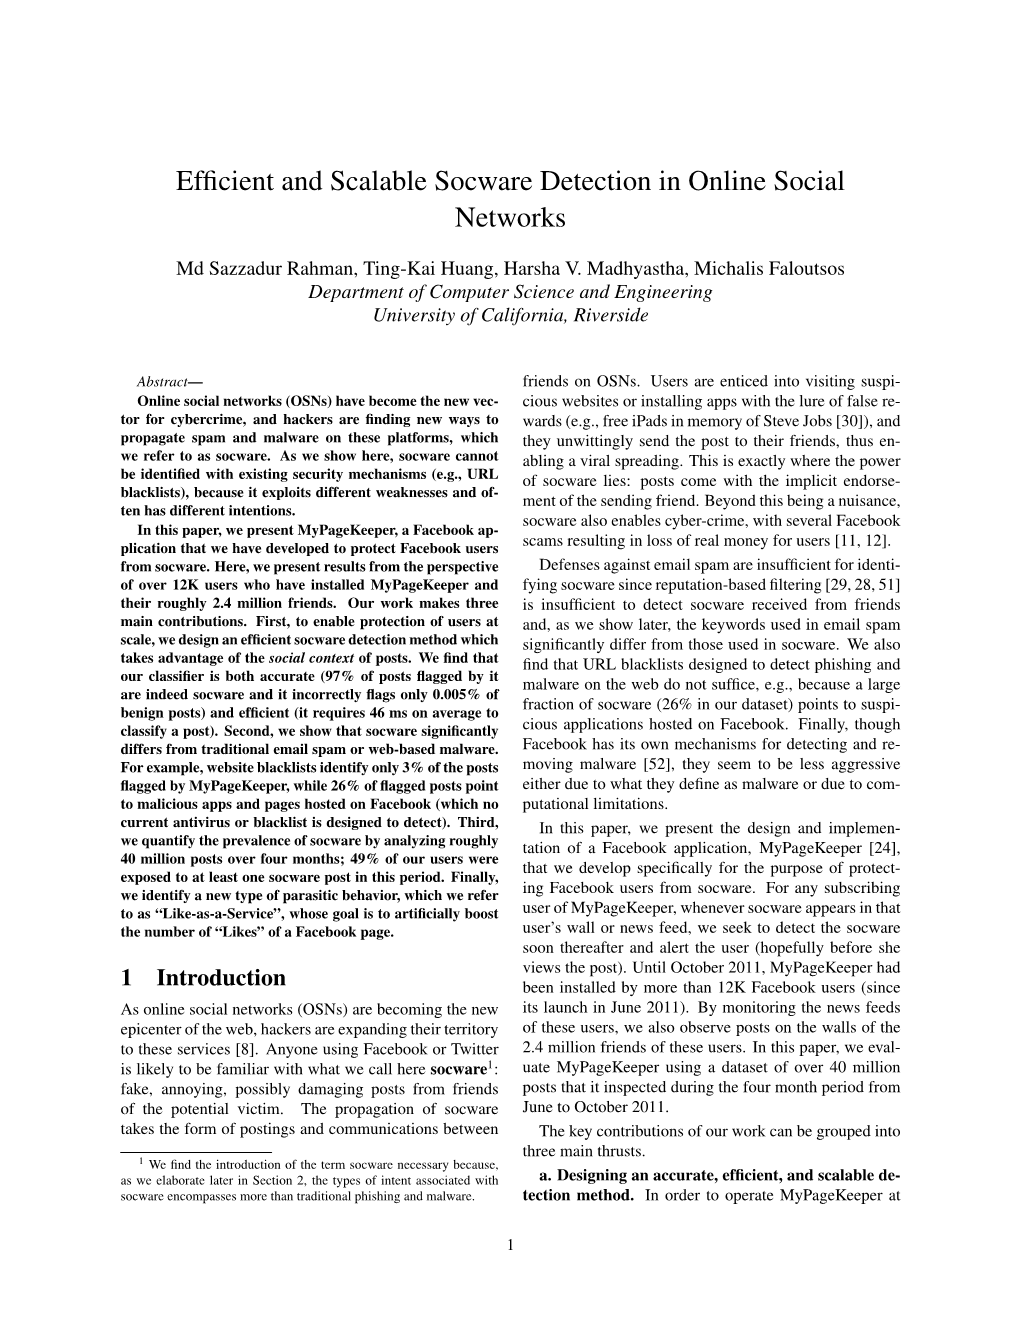 Efficient and Scalable Socware Detection in Online Social Networks